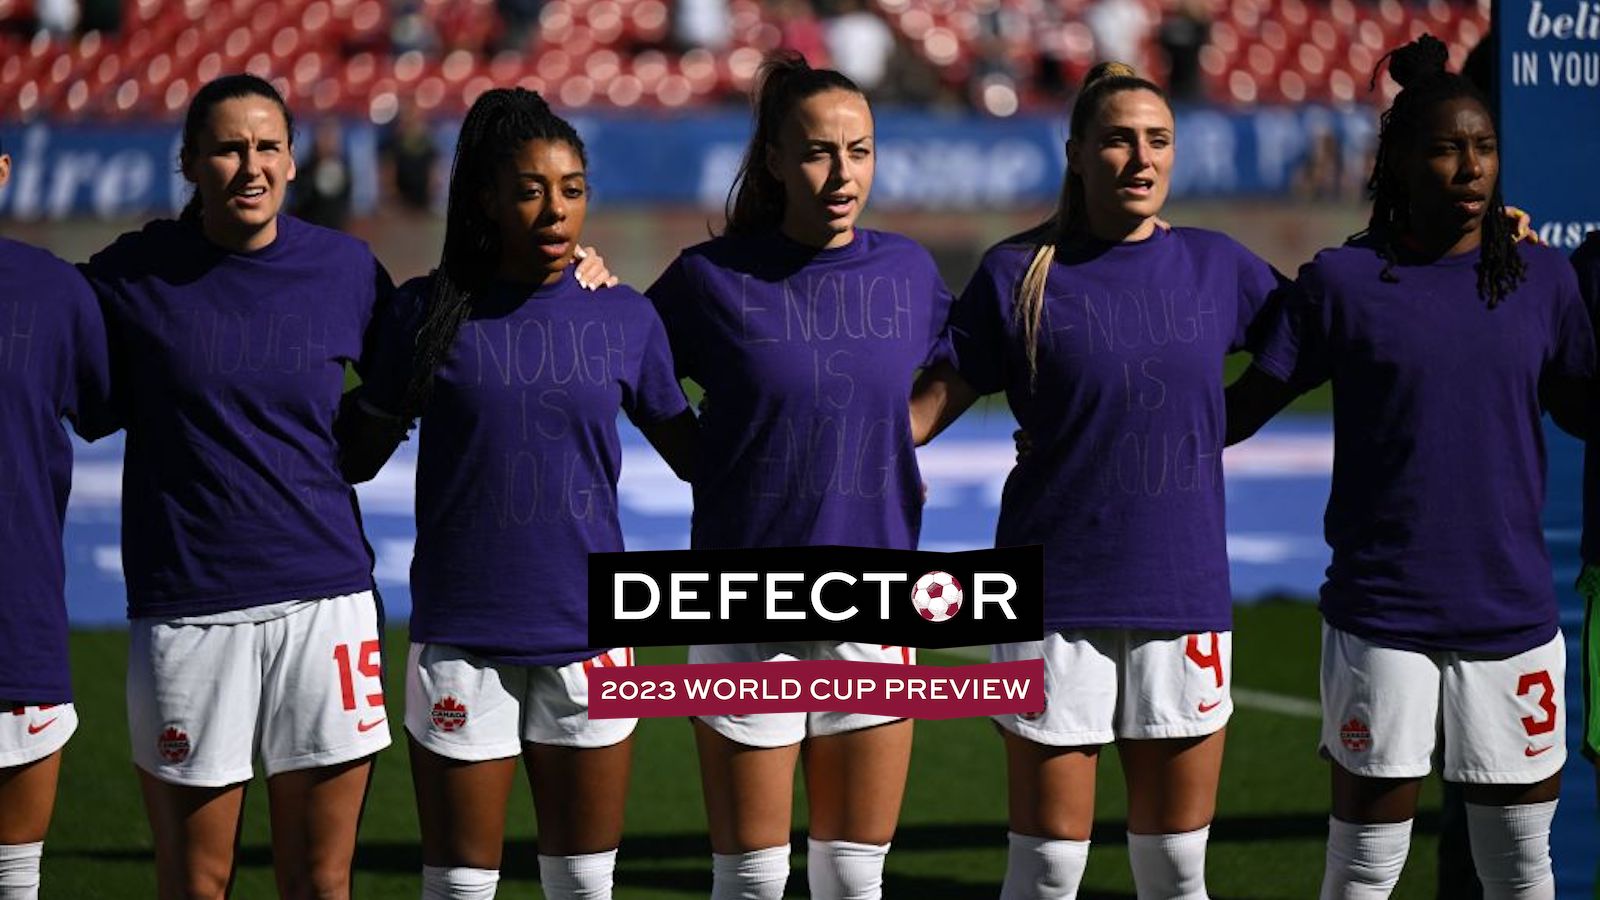 Members of the Canadian womens national soccer team wear "Enough Is Enough" shirts in protest for equal pay ahead of the 2023 SheBelieves Cup soccer match between Canada and Japan at Toyota Stadium in Frisco, Texas, on February 22, 2023.